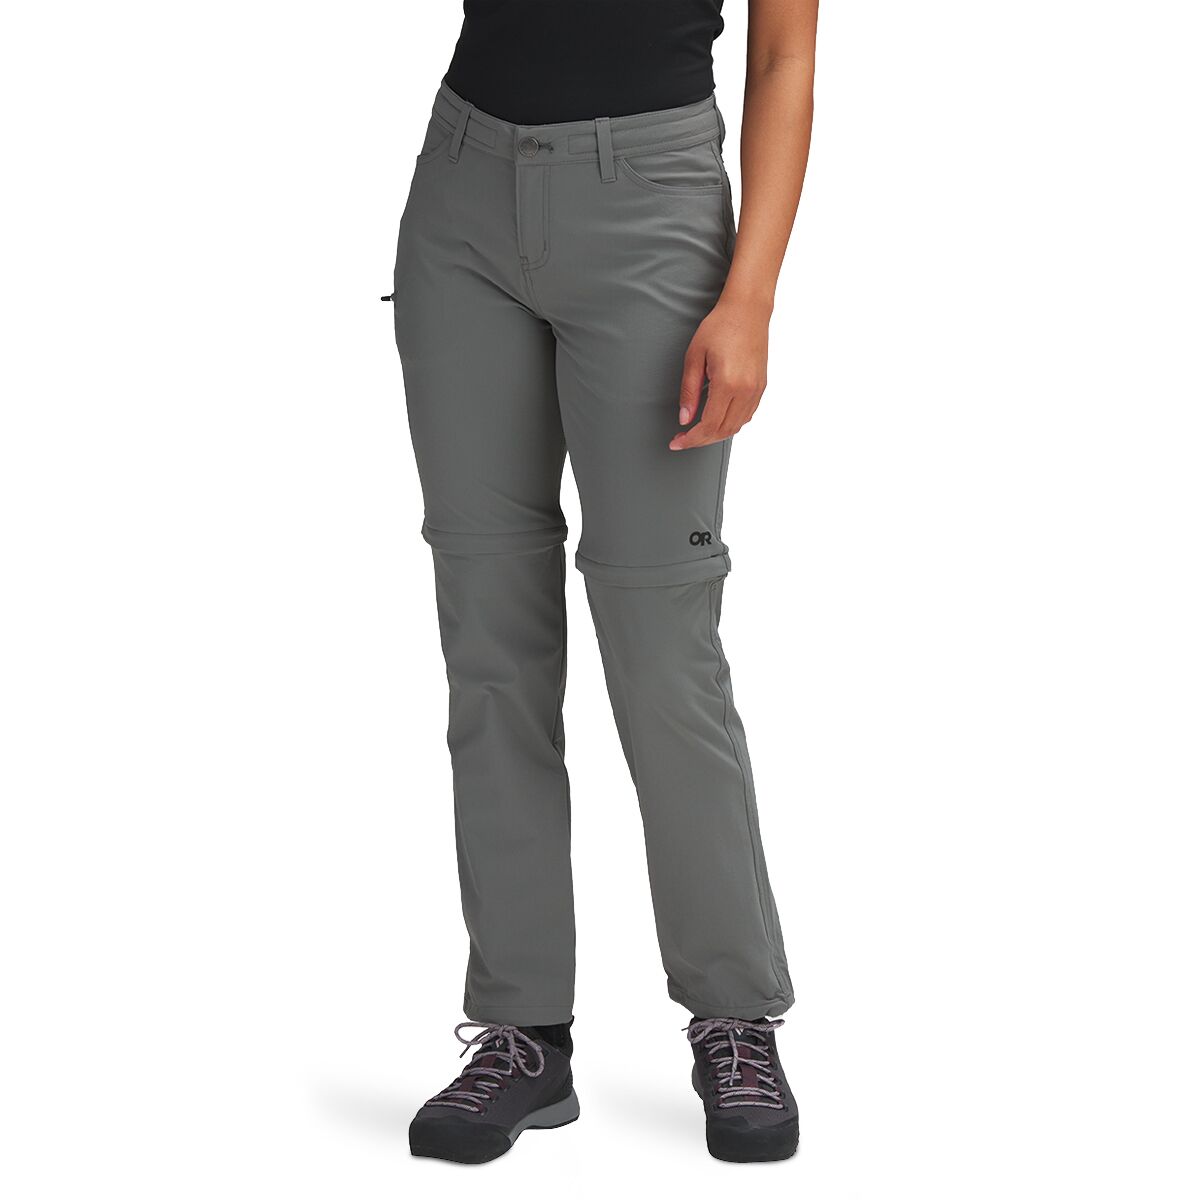 Outdoor Research Ferrosi Convertible Pant - Women's